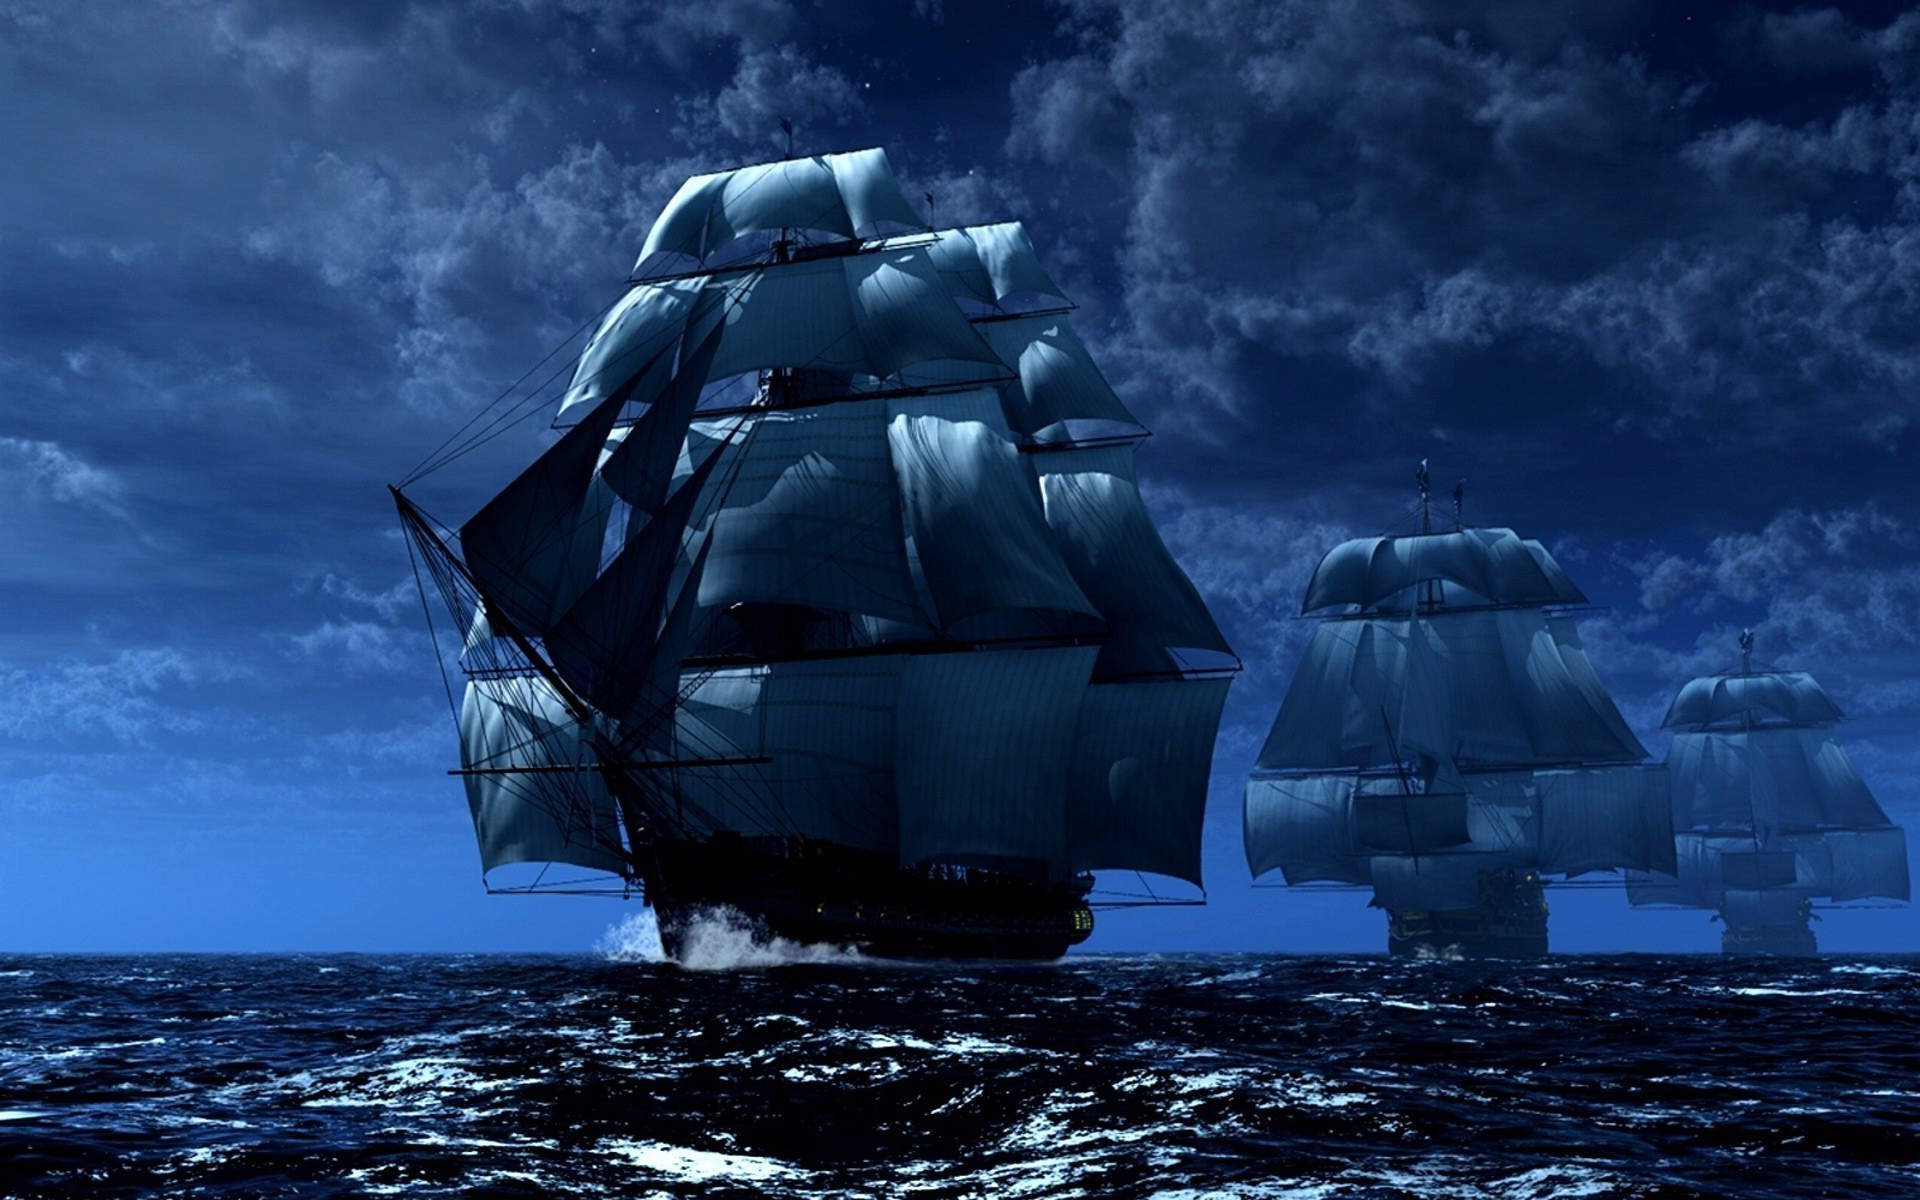 Cool PirateWallpapers